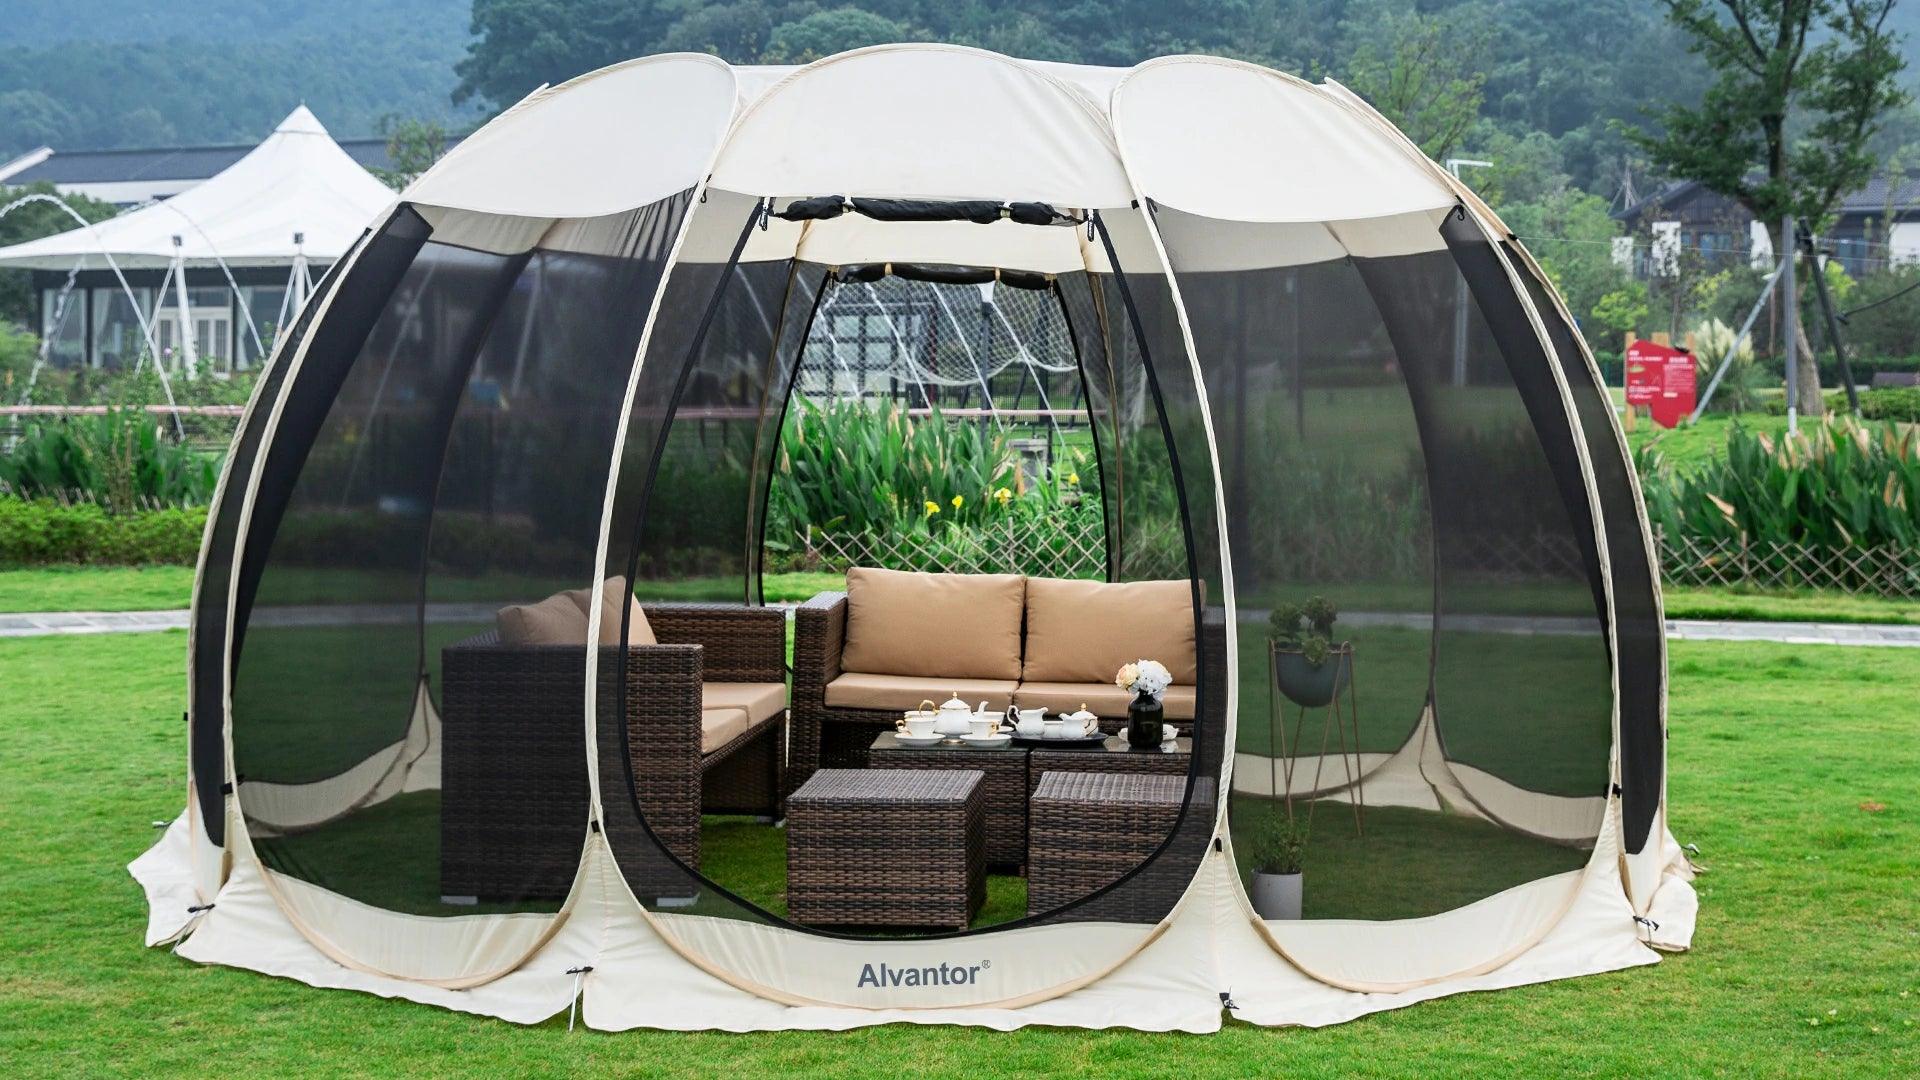 Buy An Exclusive Range Of Pop-Up Gazebos With Slides From Here! - Alvantor